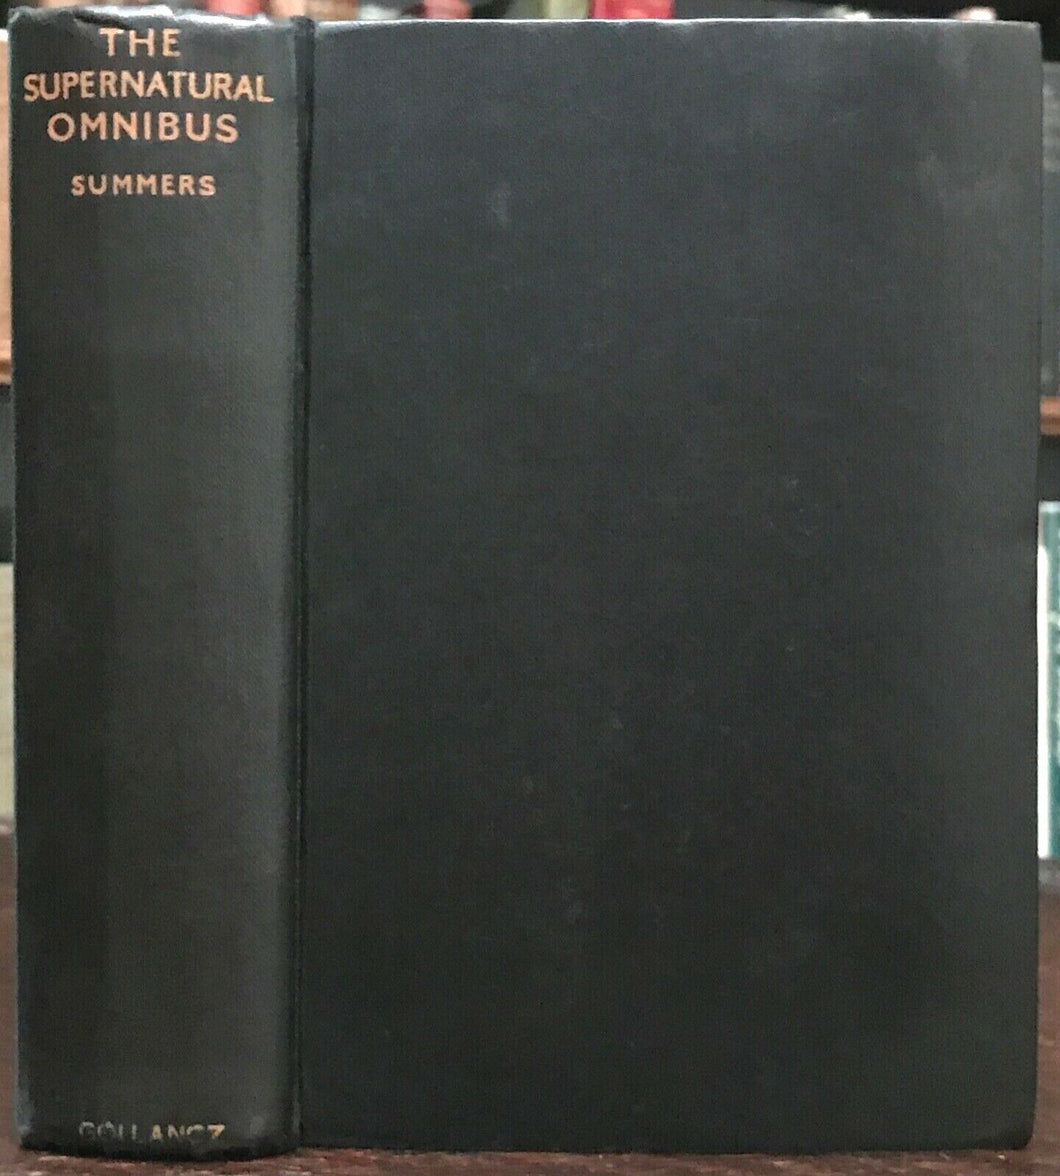 1931 SUPERNATURAL OMNIBUS - Summers, 1st Ed - GHOSTS WEREWOLVES VAMPIRES WITCHES